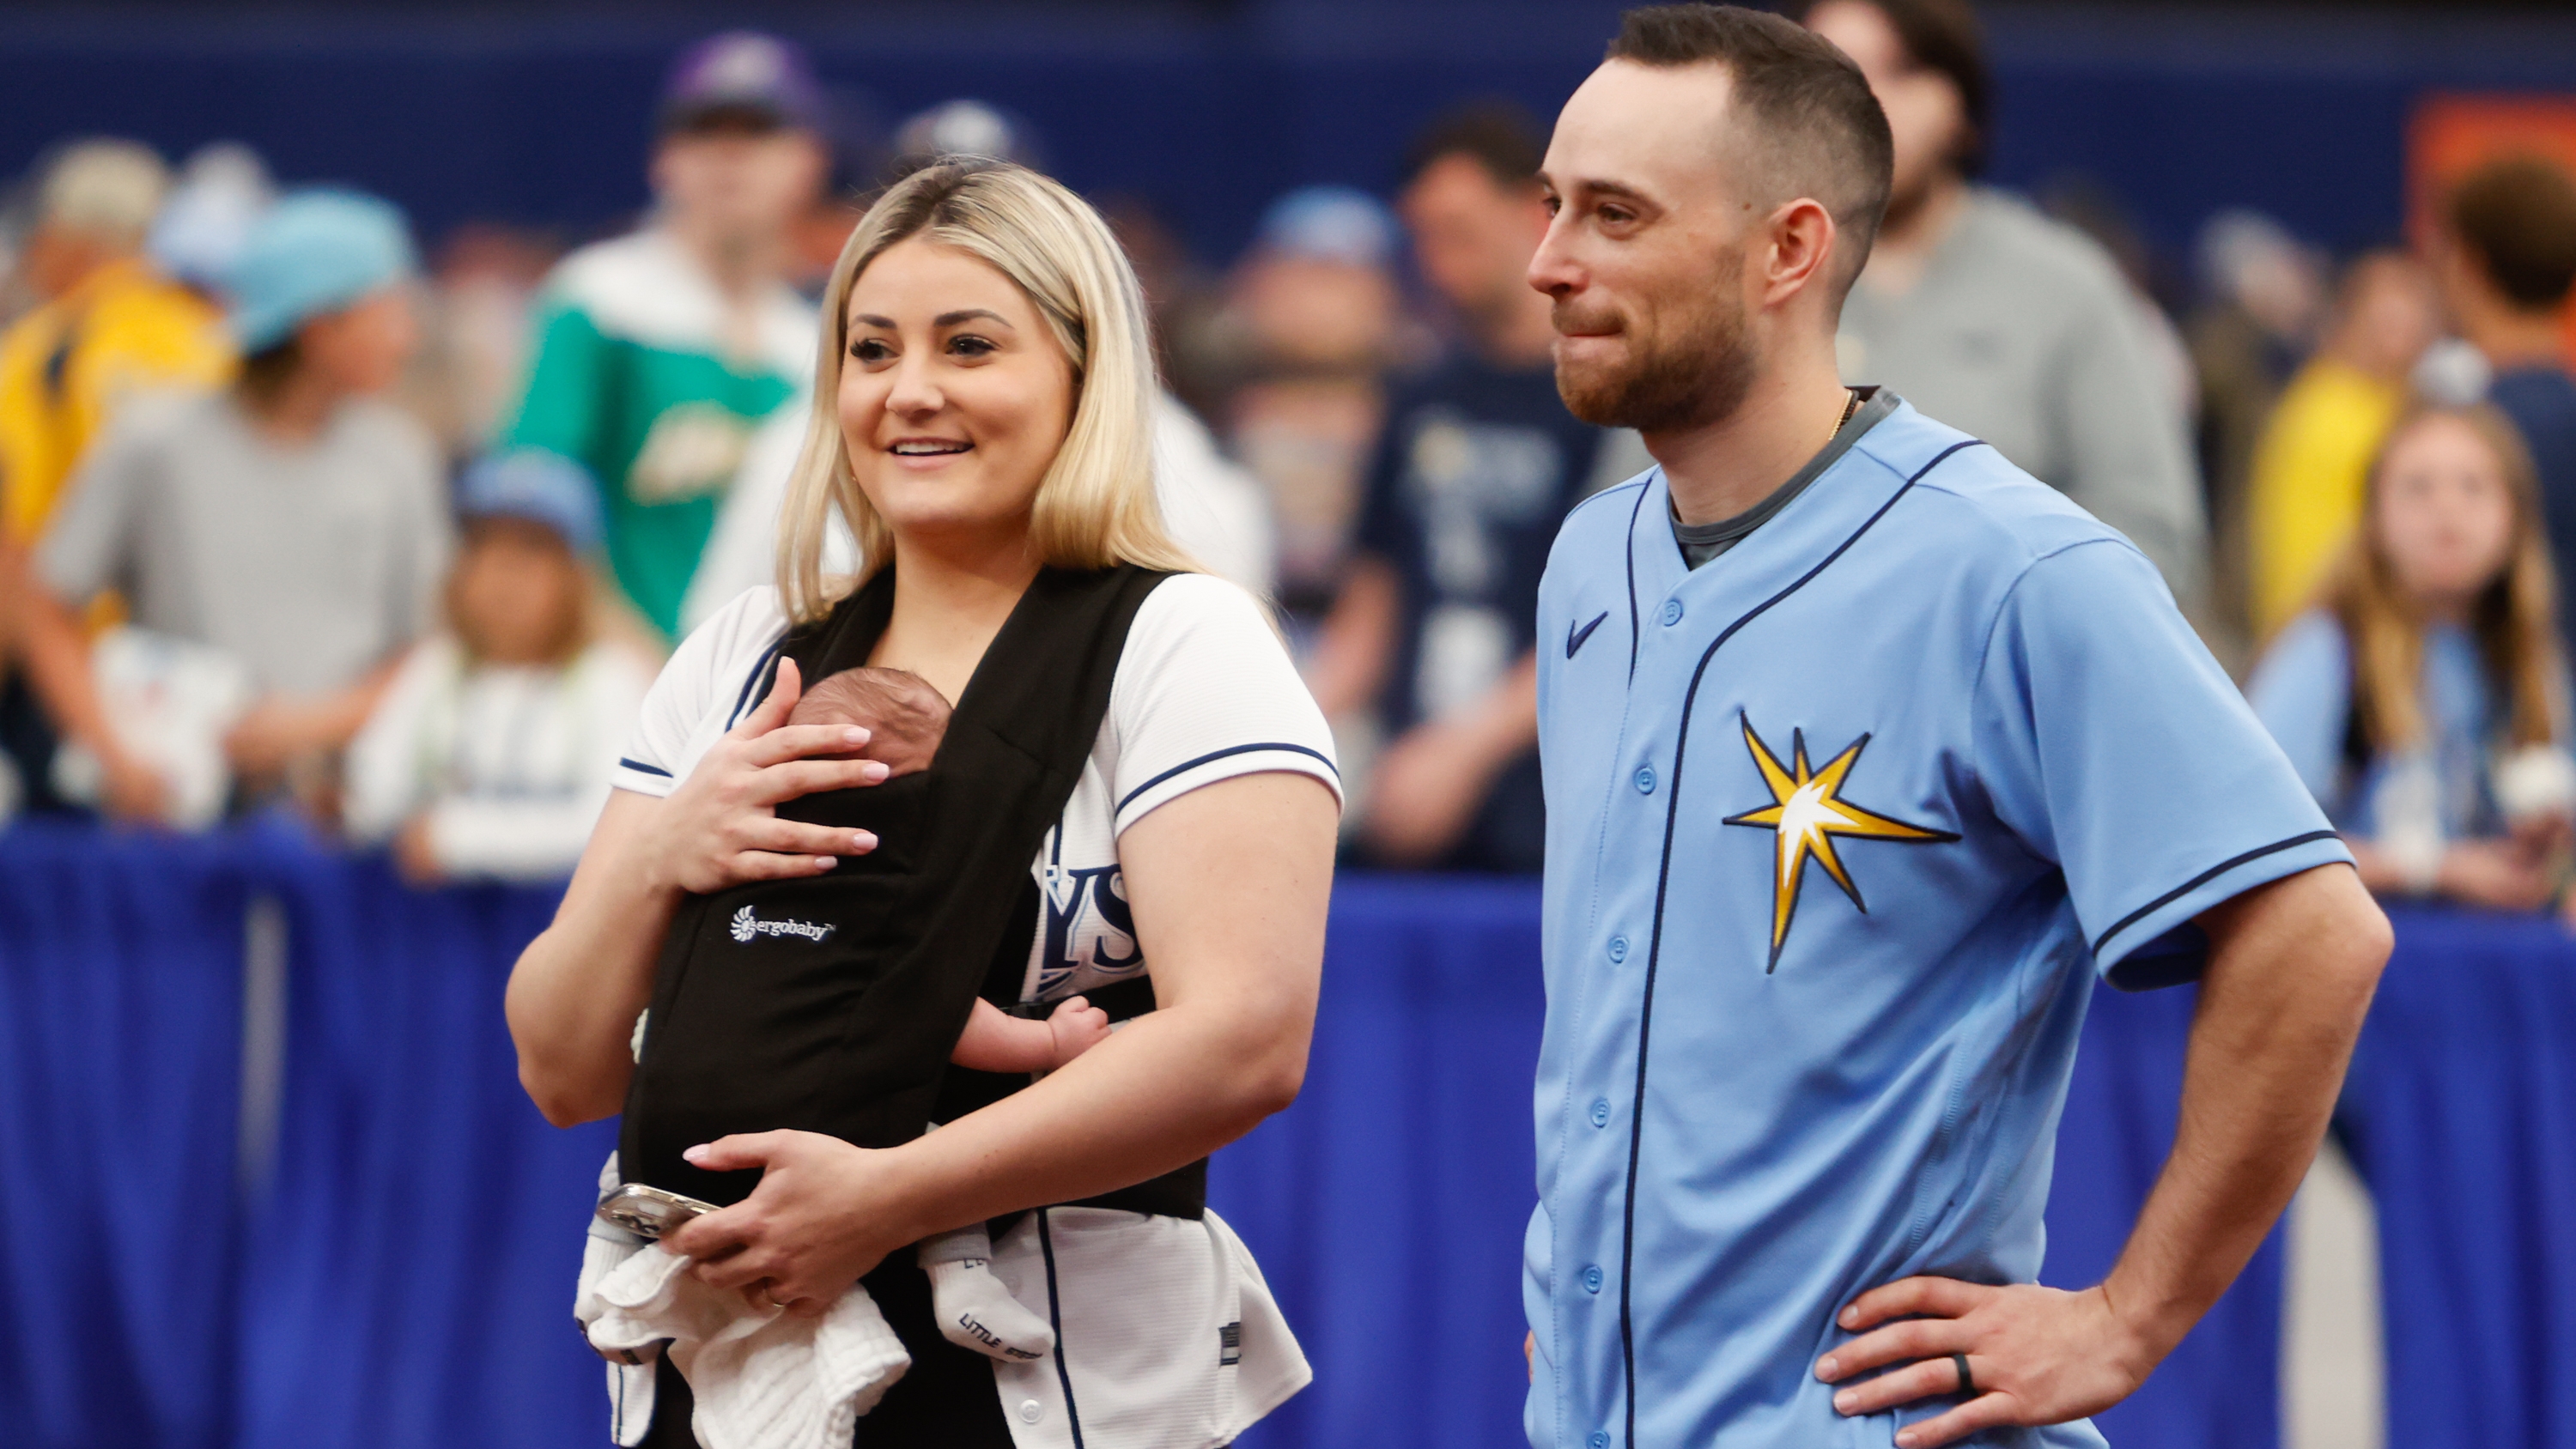 Madison Lowe, wife of Rays player Brandon Lowe, starts baking at home